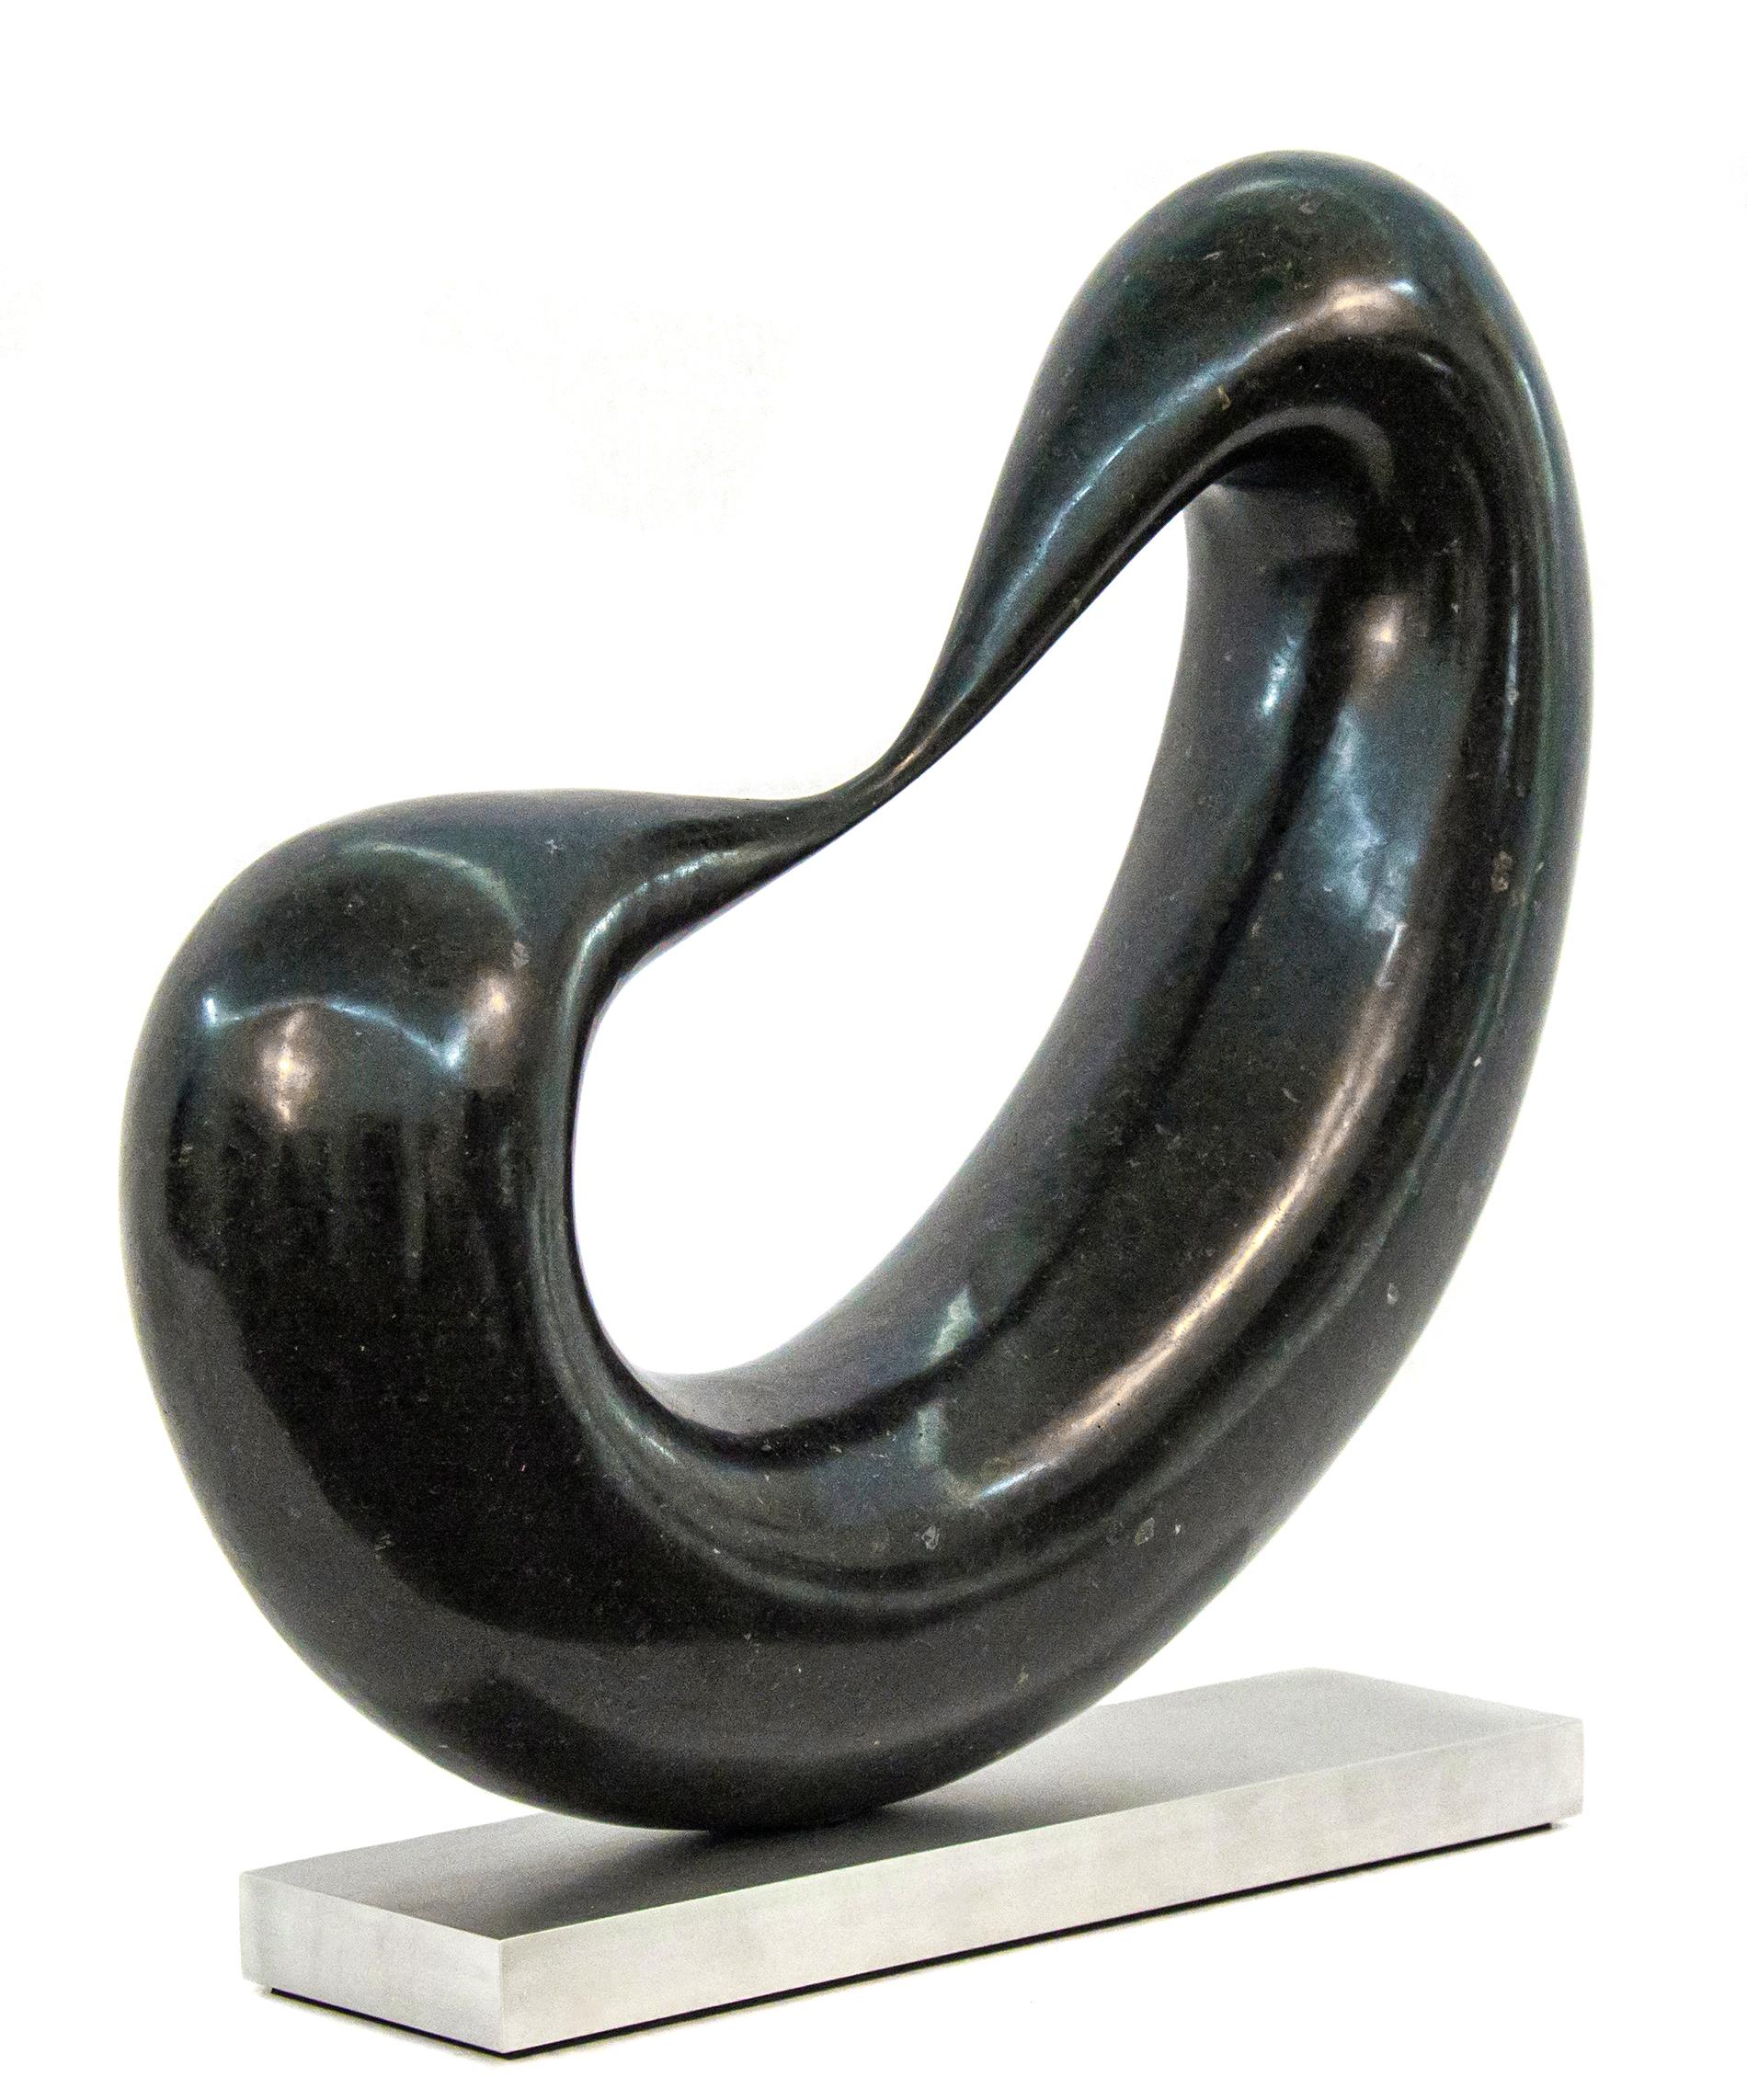 Bridge No. 3 3/50 - dark, smooth, polished, abstract, black granite sculpture - Abstract Sculpture by Jeremy Guy